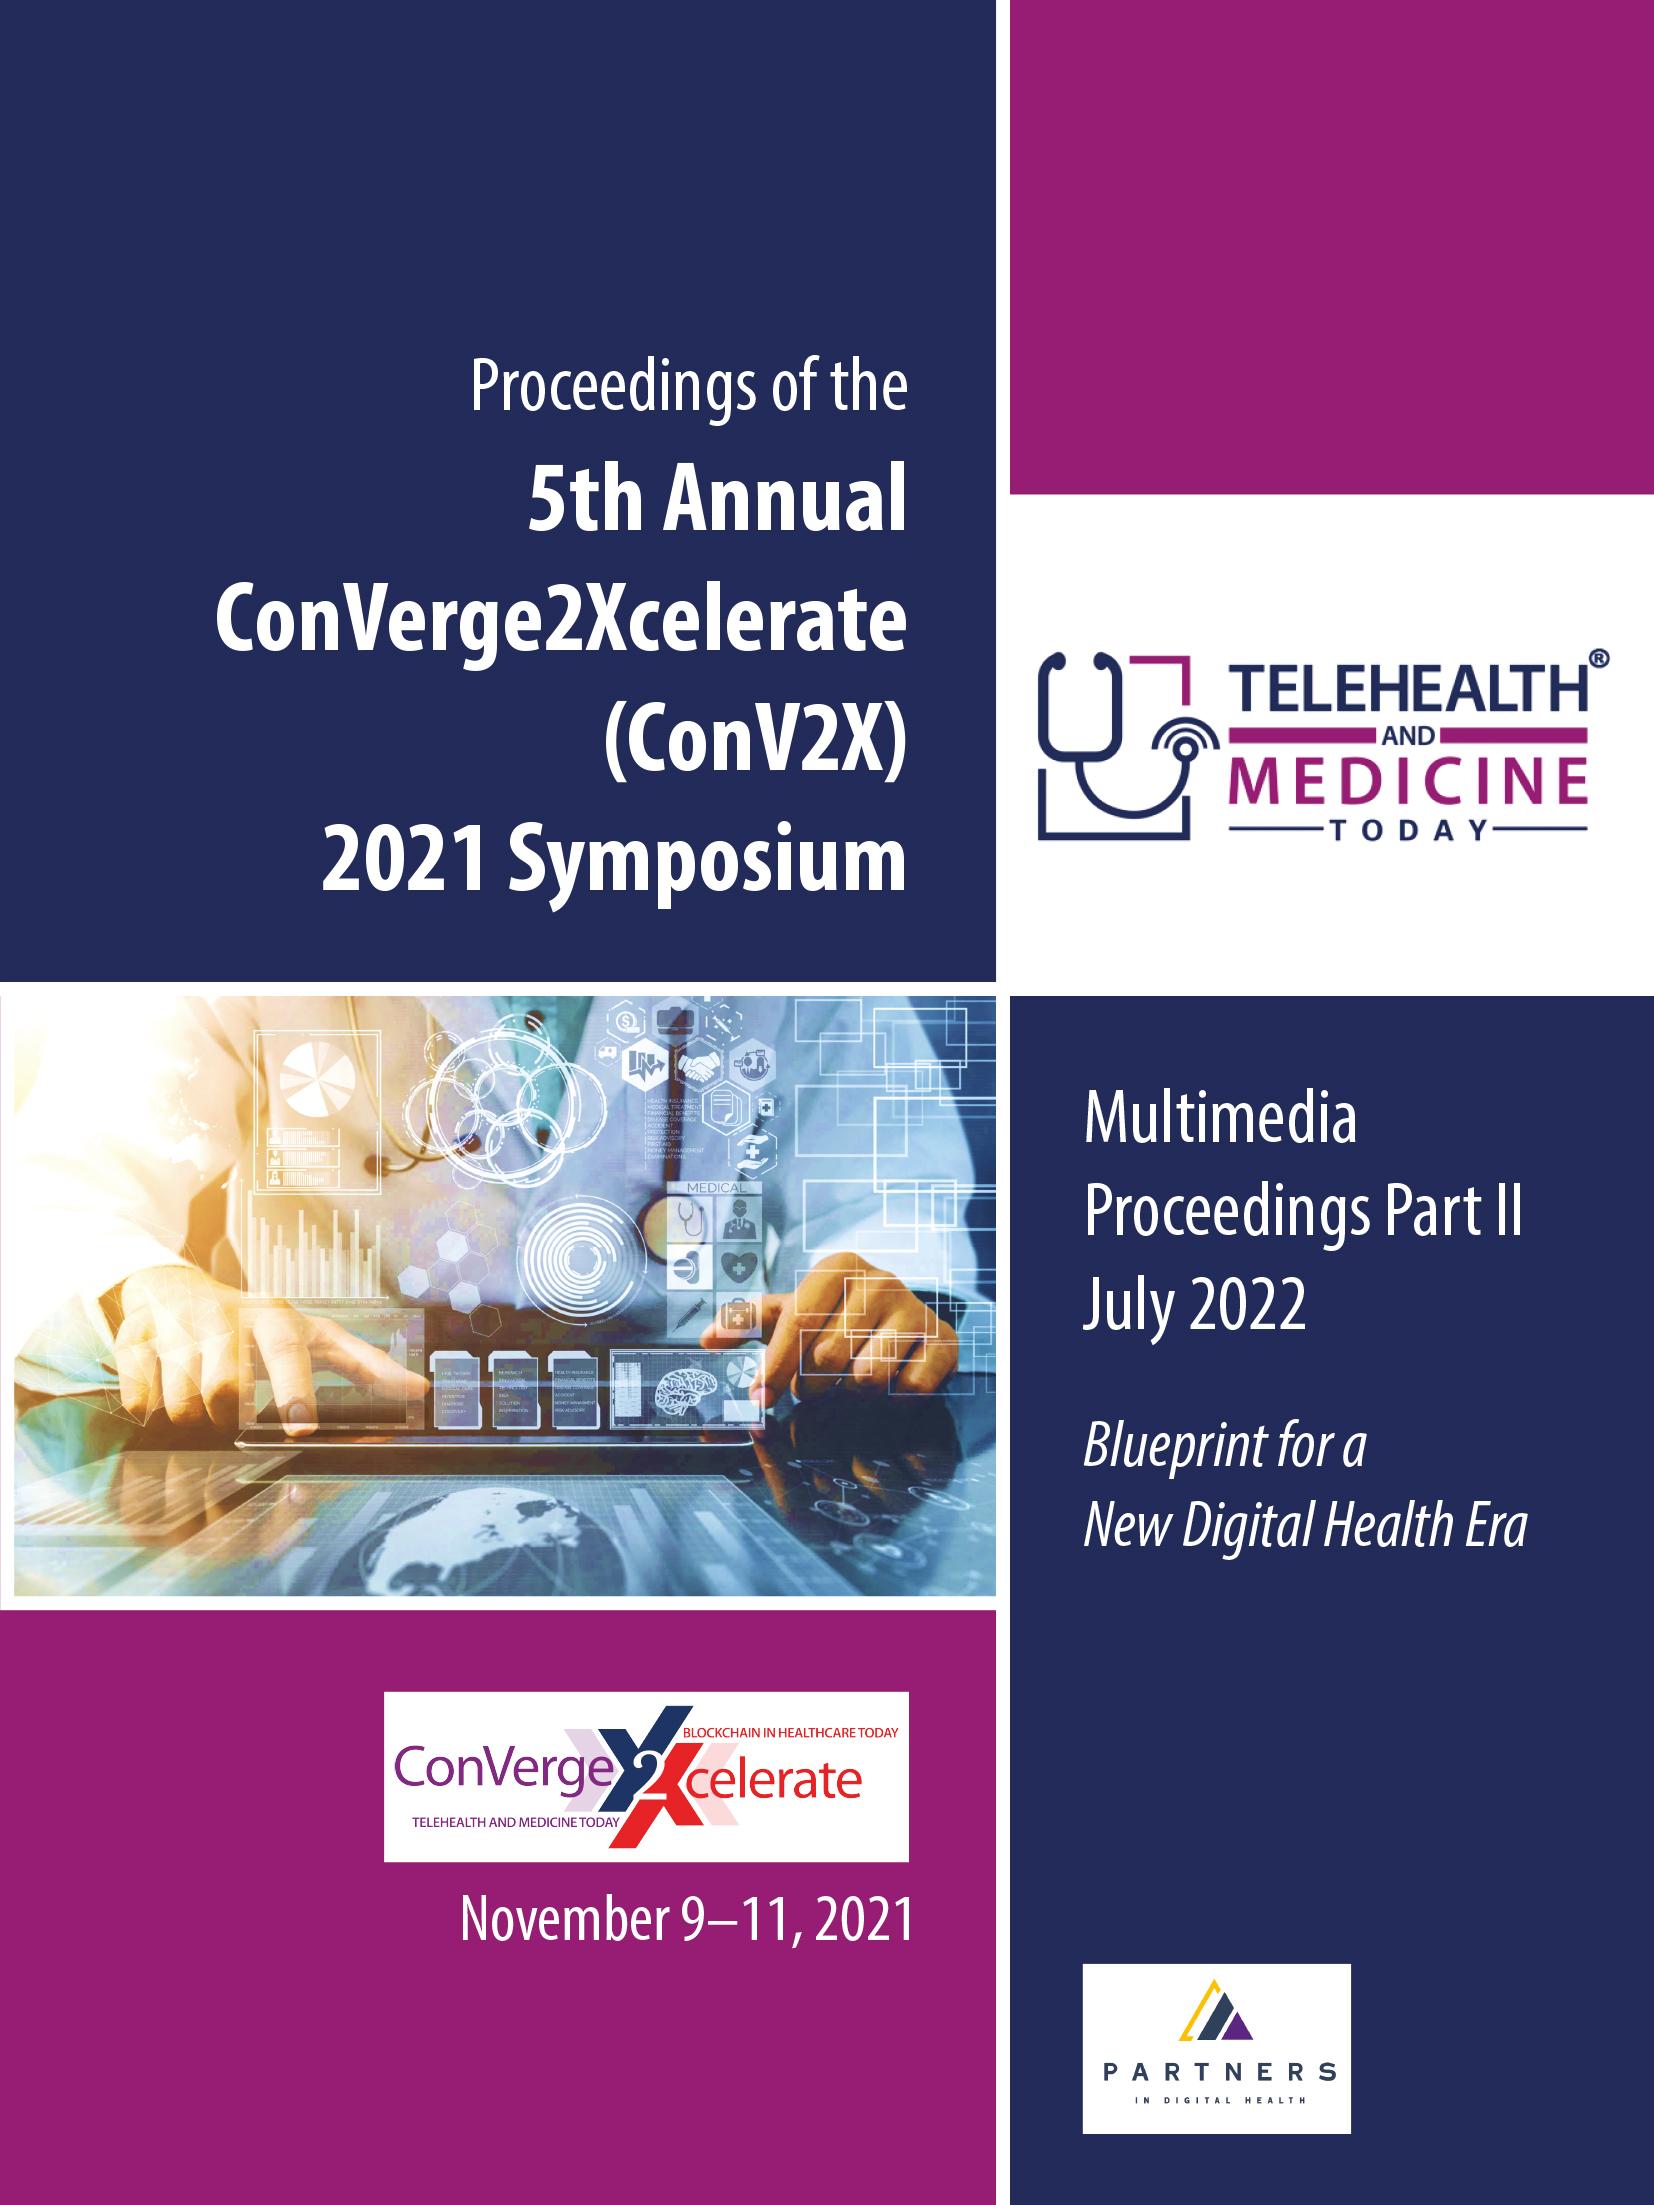 Telehealth and Medicine Today (THMT) is pleased to present the ConV2X 2021 Multimedia Symposium Proceedings, Part II, Special Issue